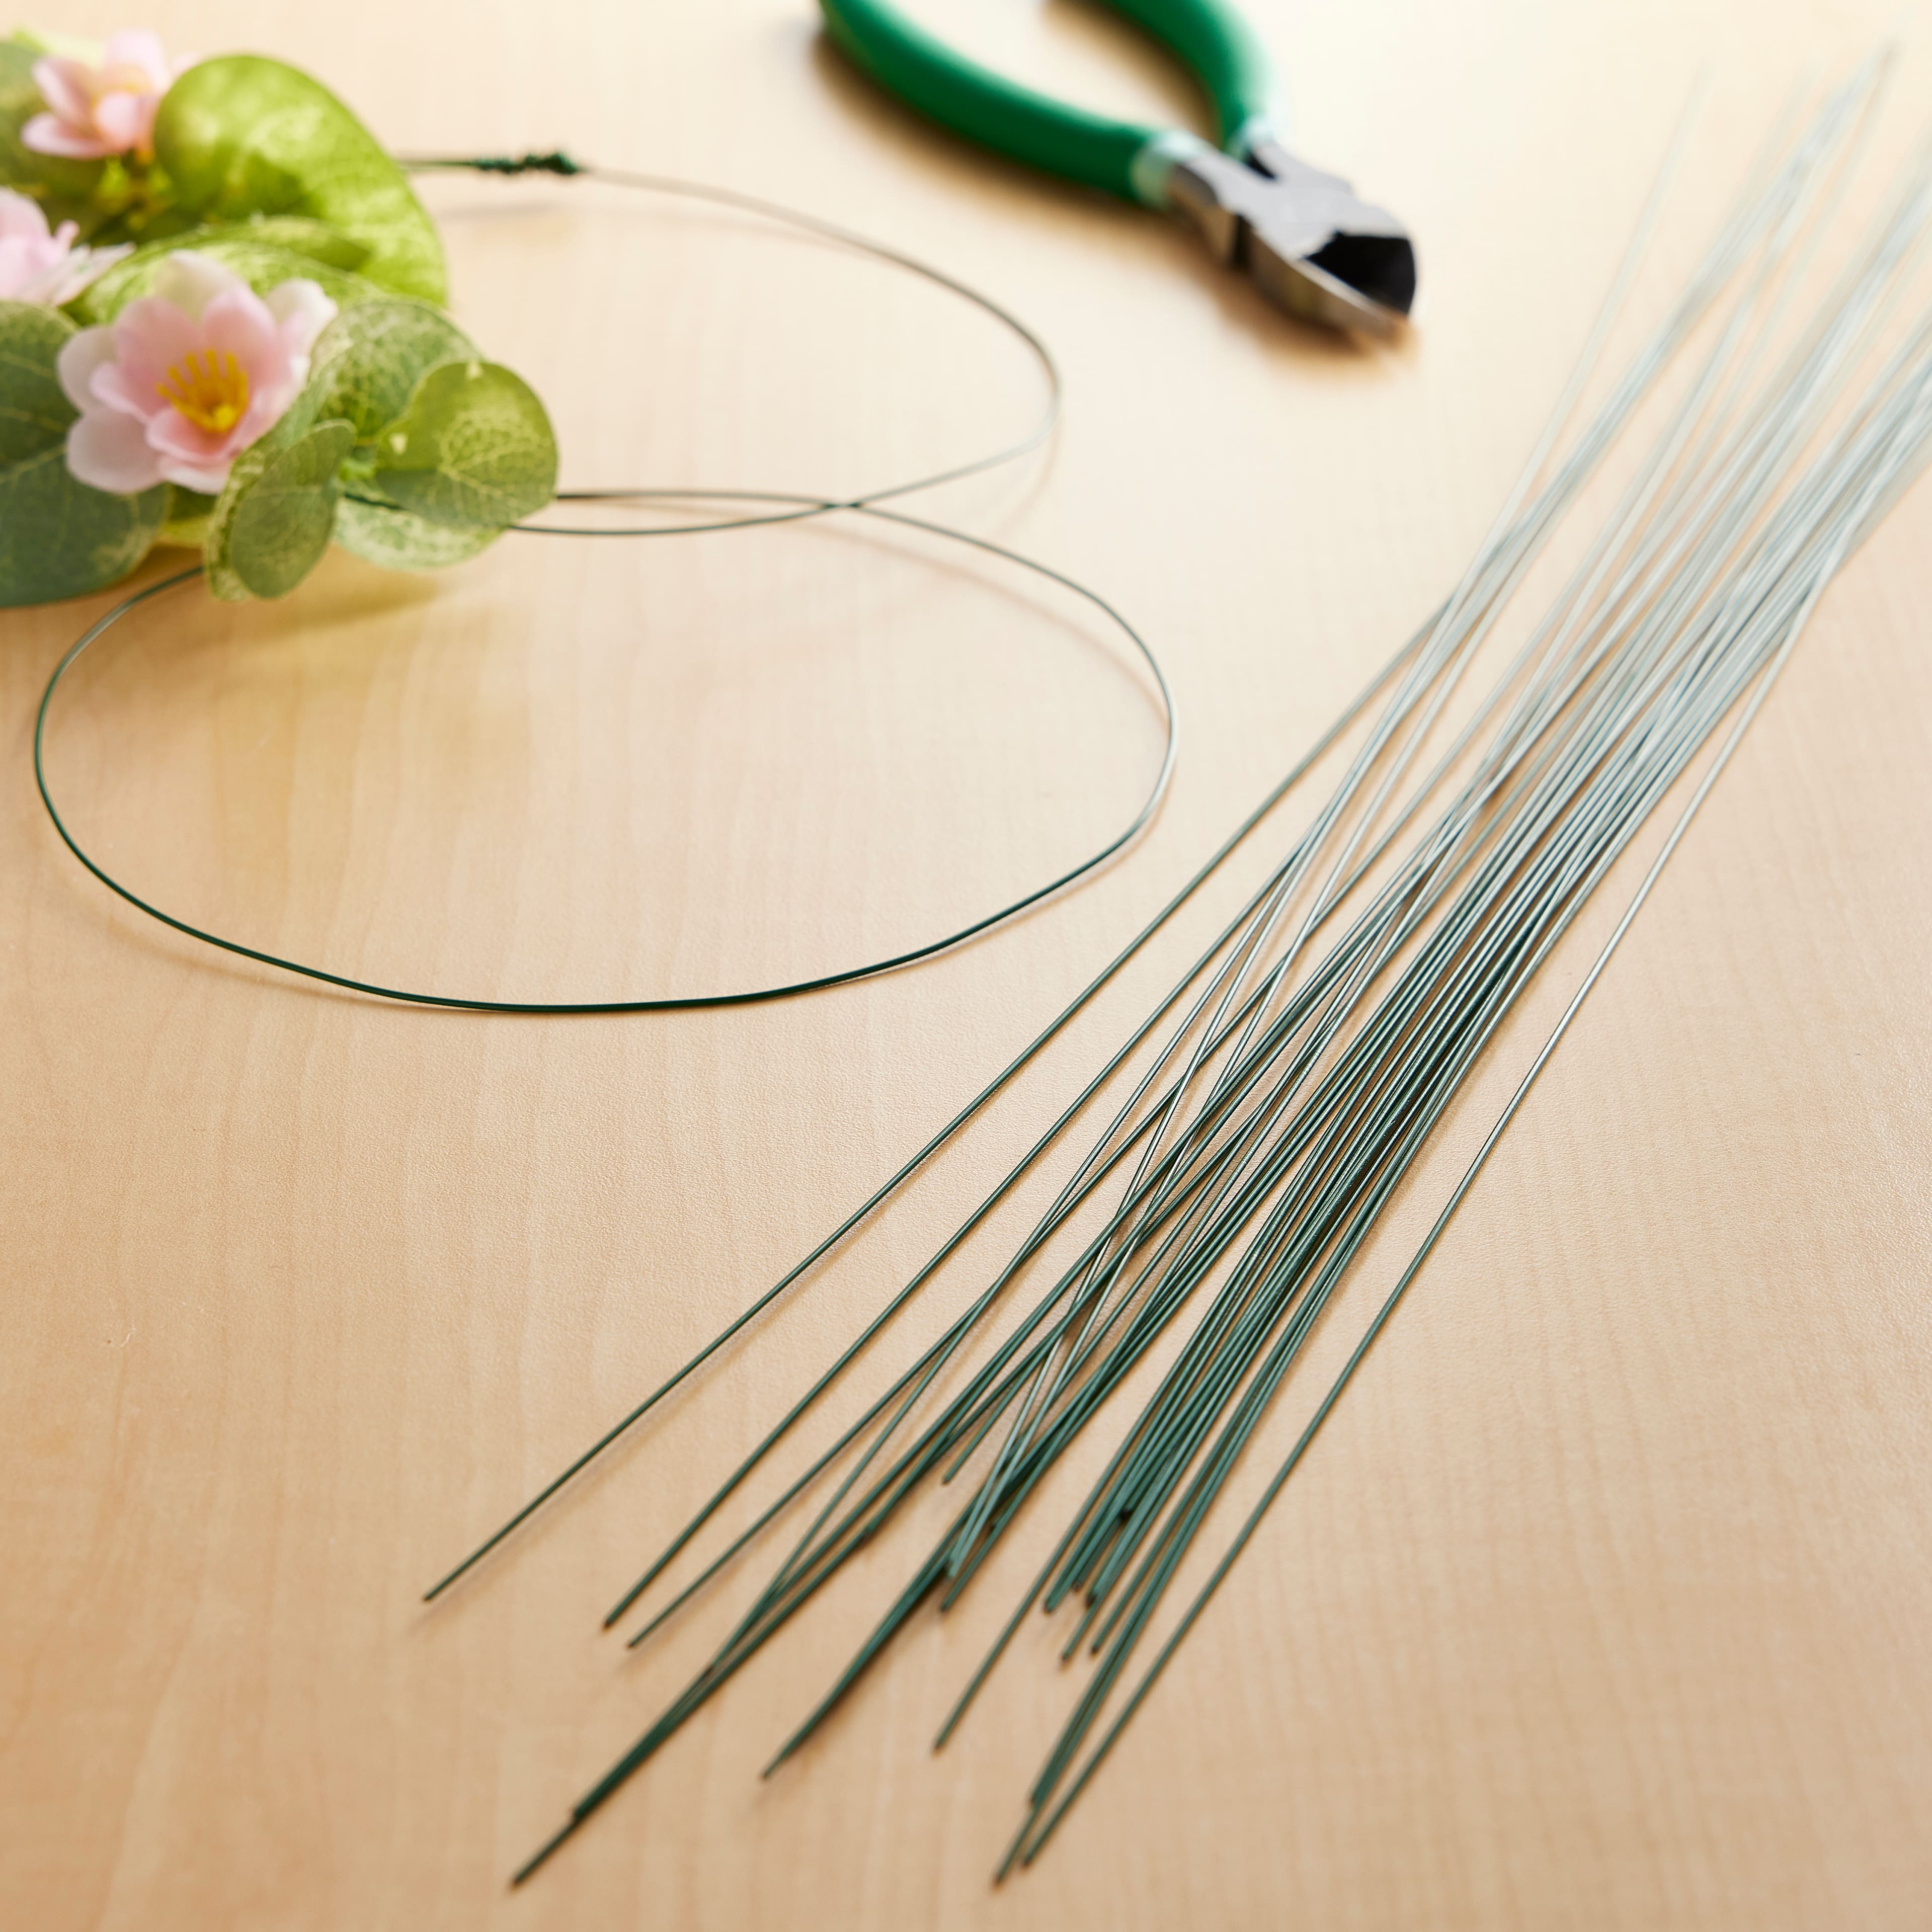 Party Favors & Supplies :: Floral Supplies :: Floral Wire :: 20 Gauge Green  Floral Paddle Wire 4 oz